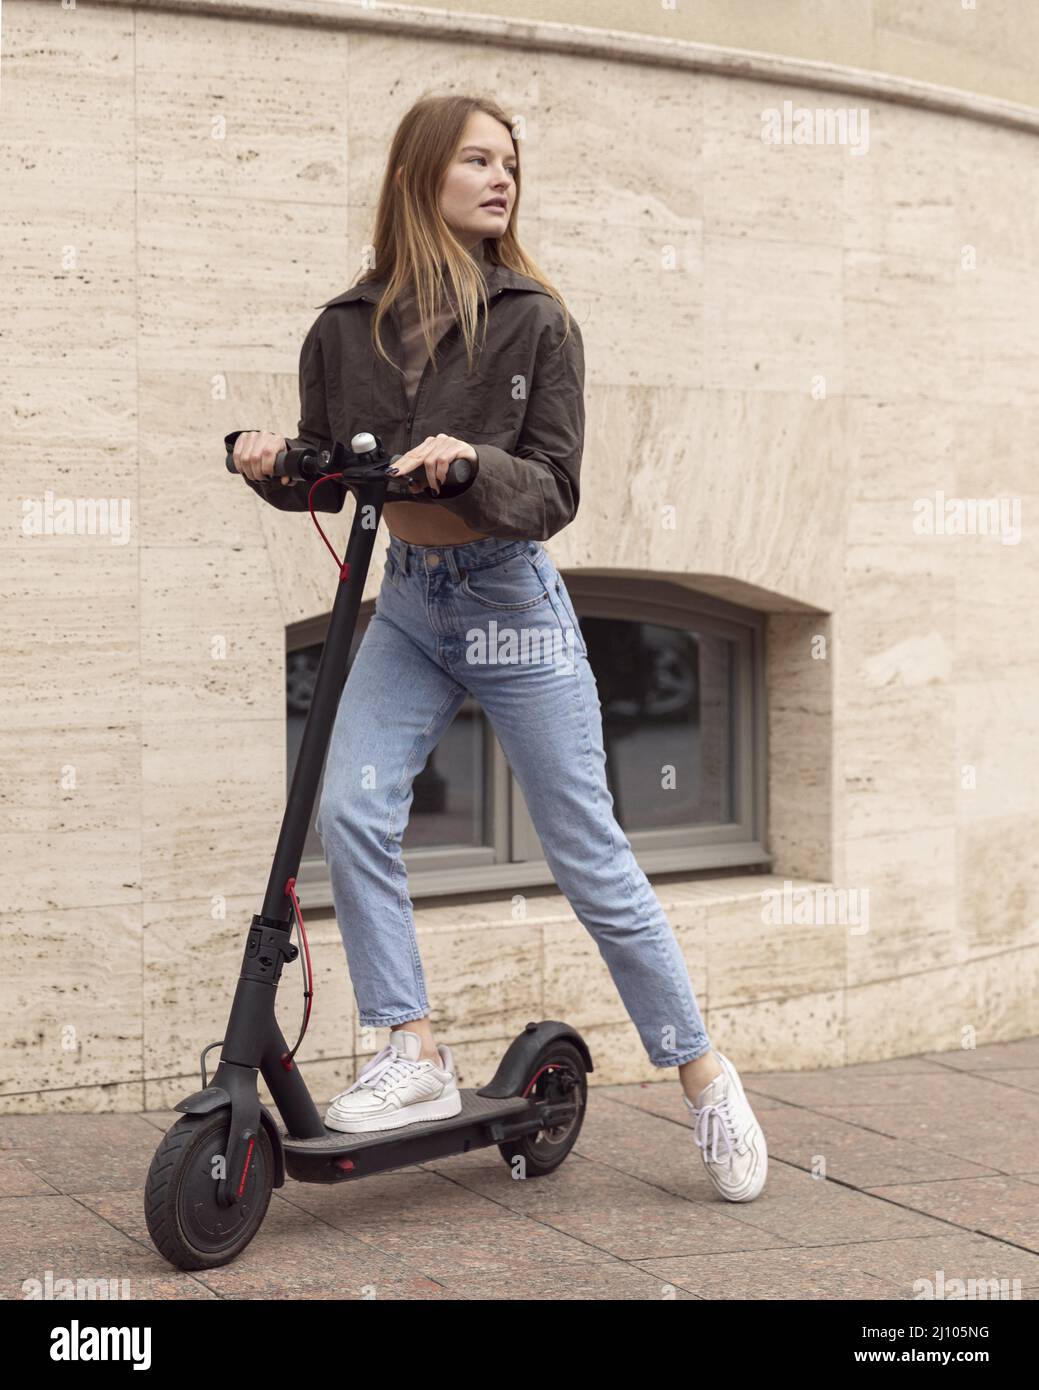 Woman electric scooter outdoors Stock Photo